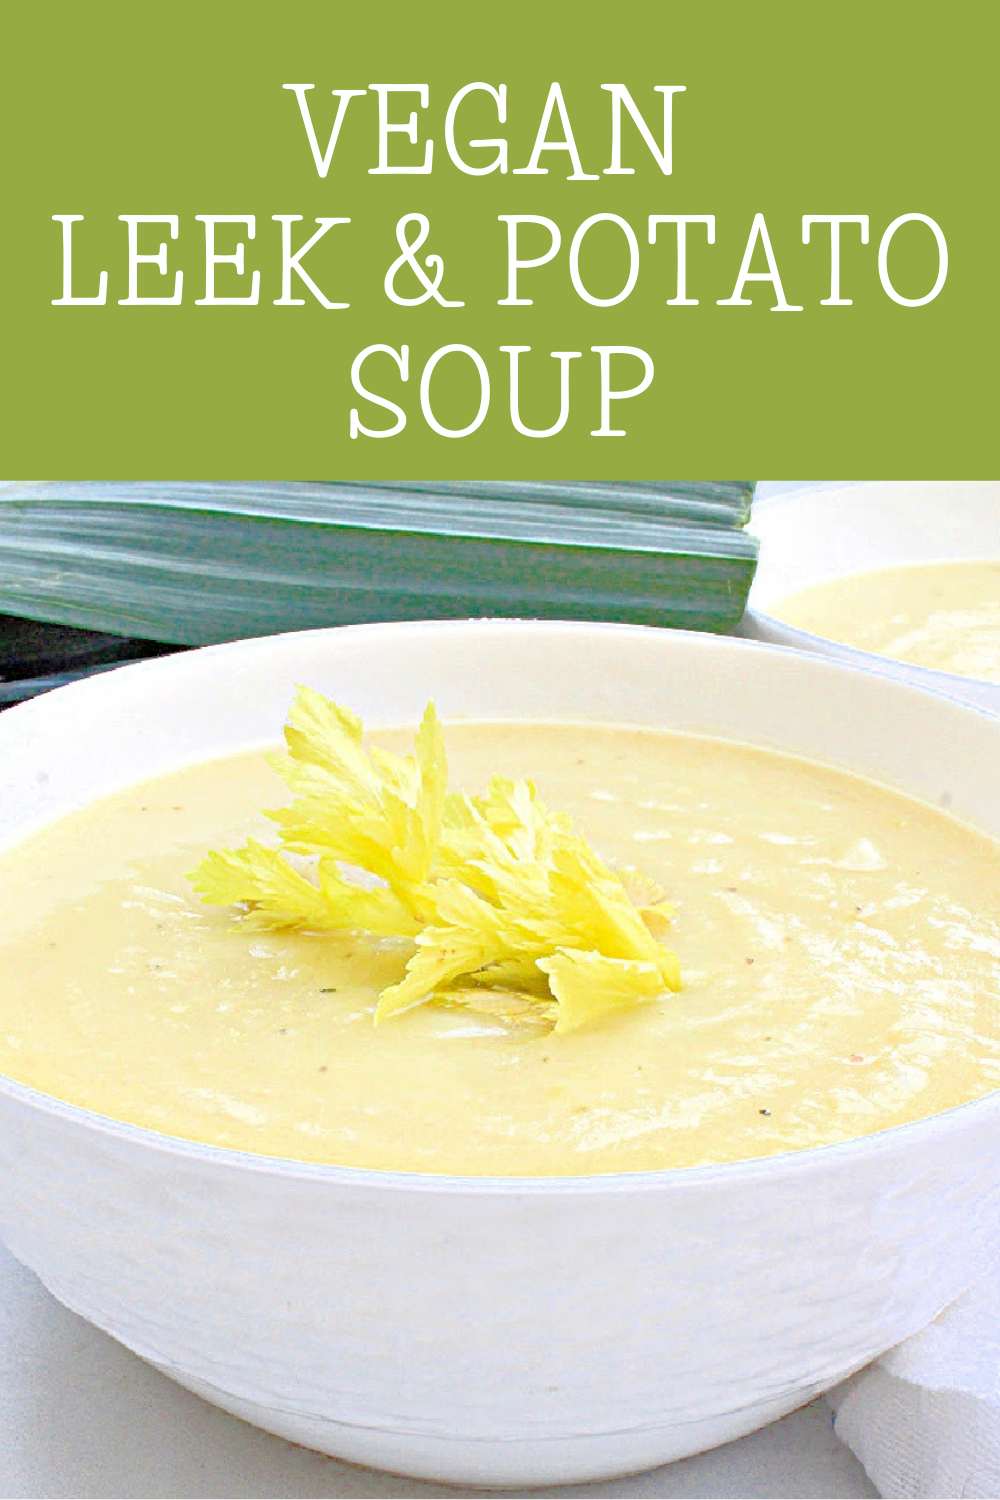 Vegan Leek and Potato Soup ~ This simple and savory, budget-friendly soup is easy to make in 30 minutes or less! via @thiswifecooks